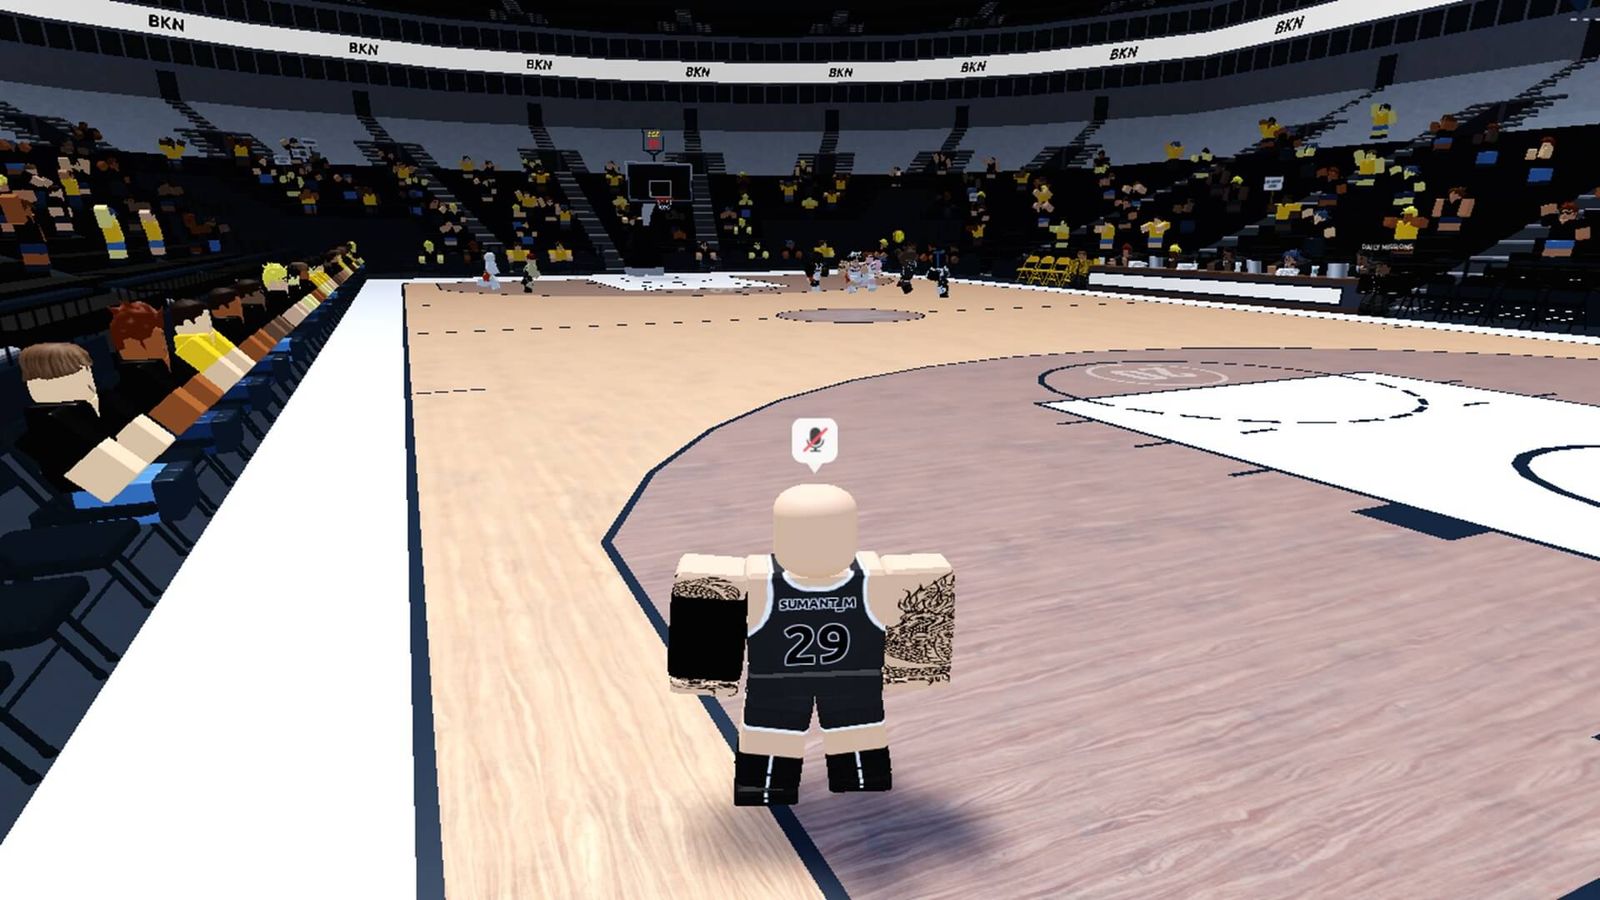 Roblox character standing on basketball court in Basketball Legends